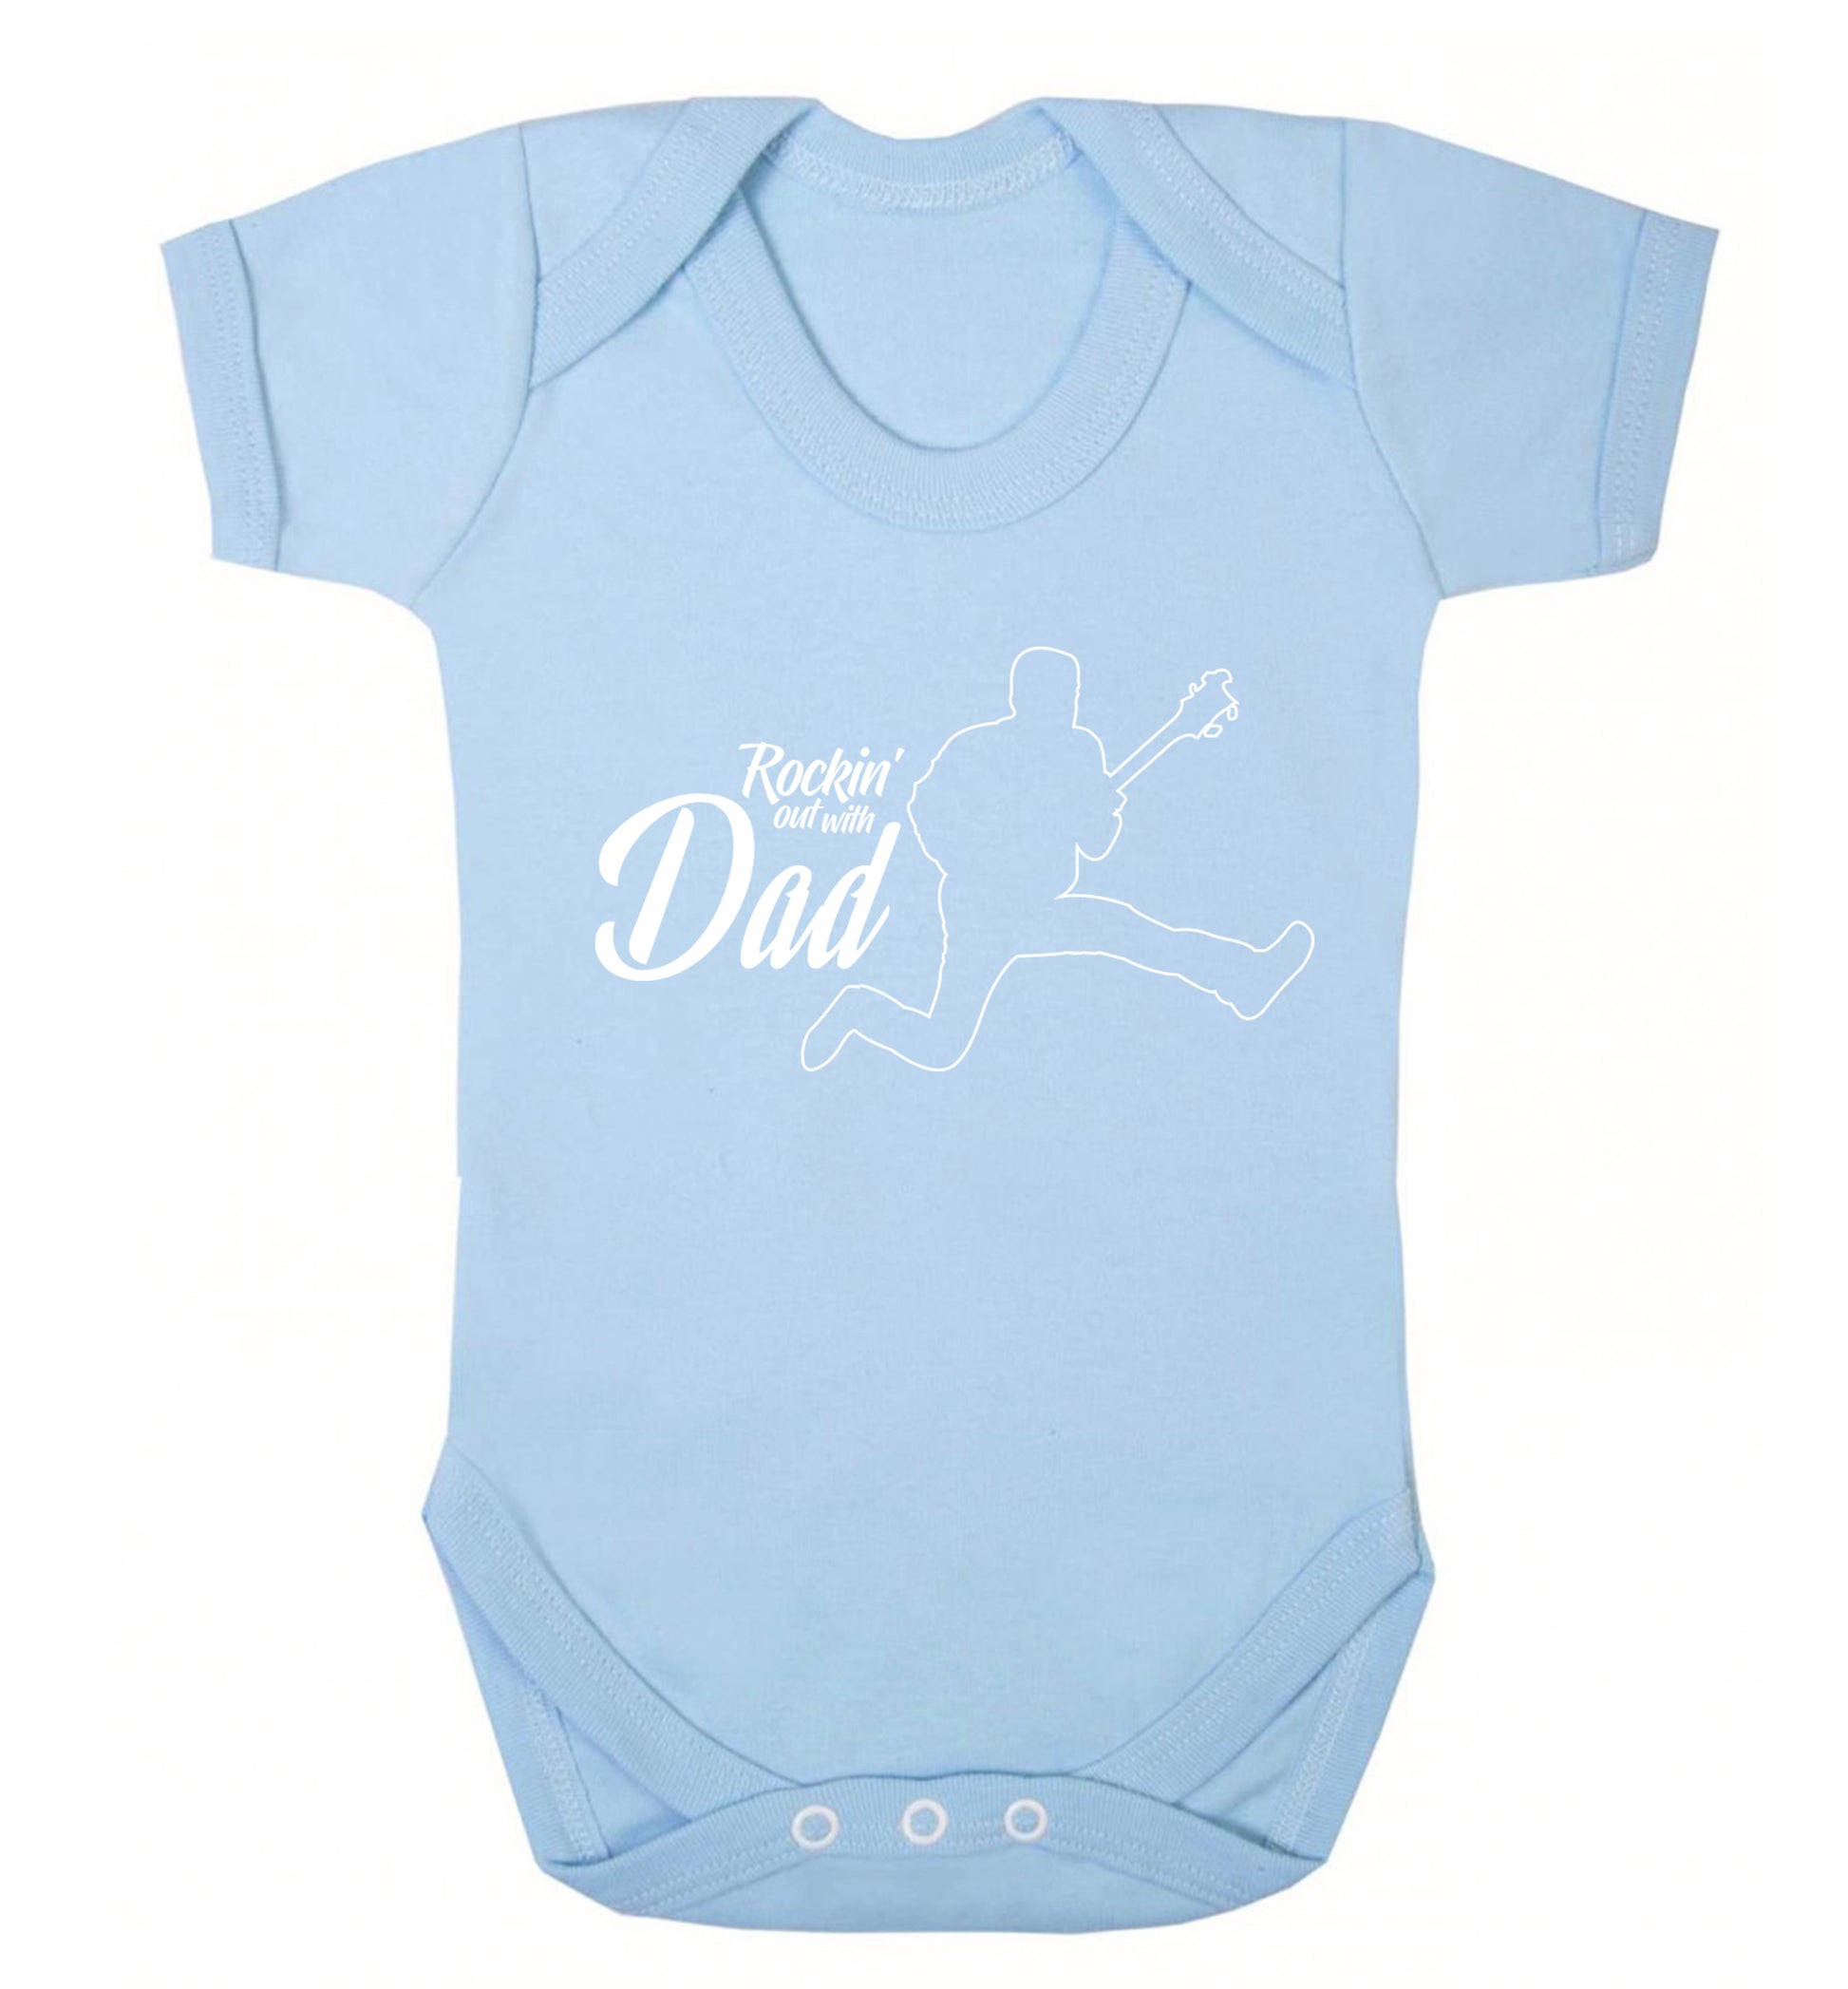 Rockin out with dad Baby Vest pale blue 18-24 months